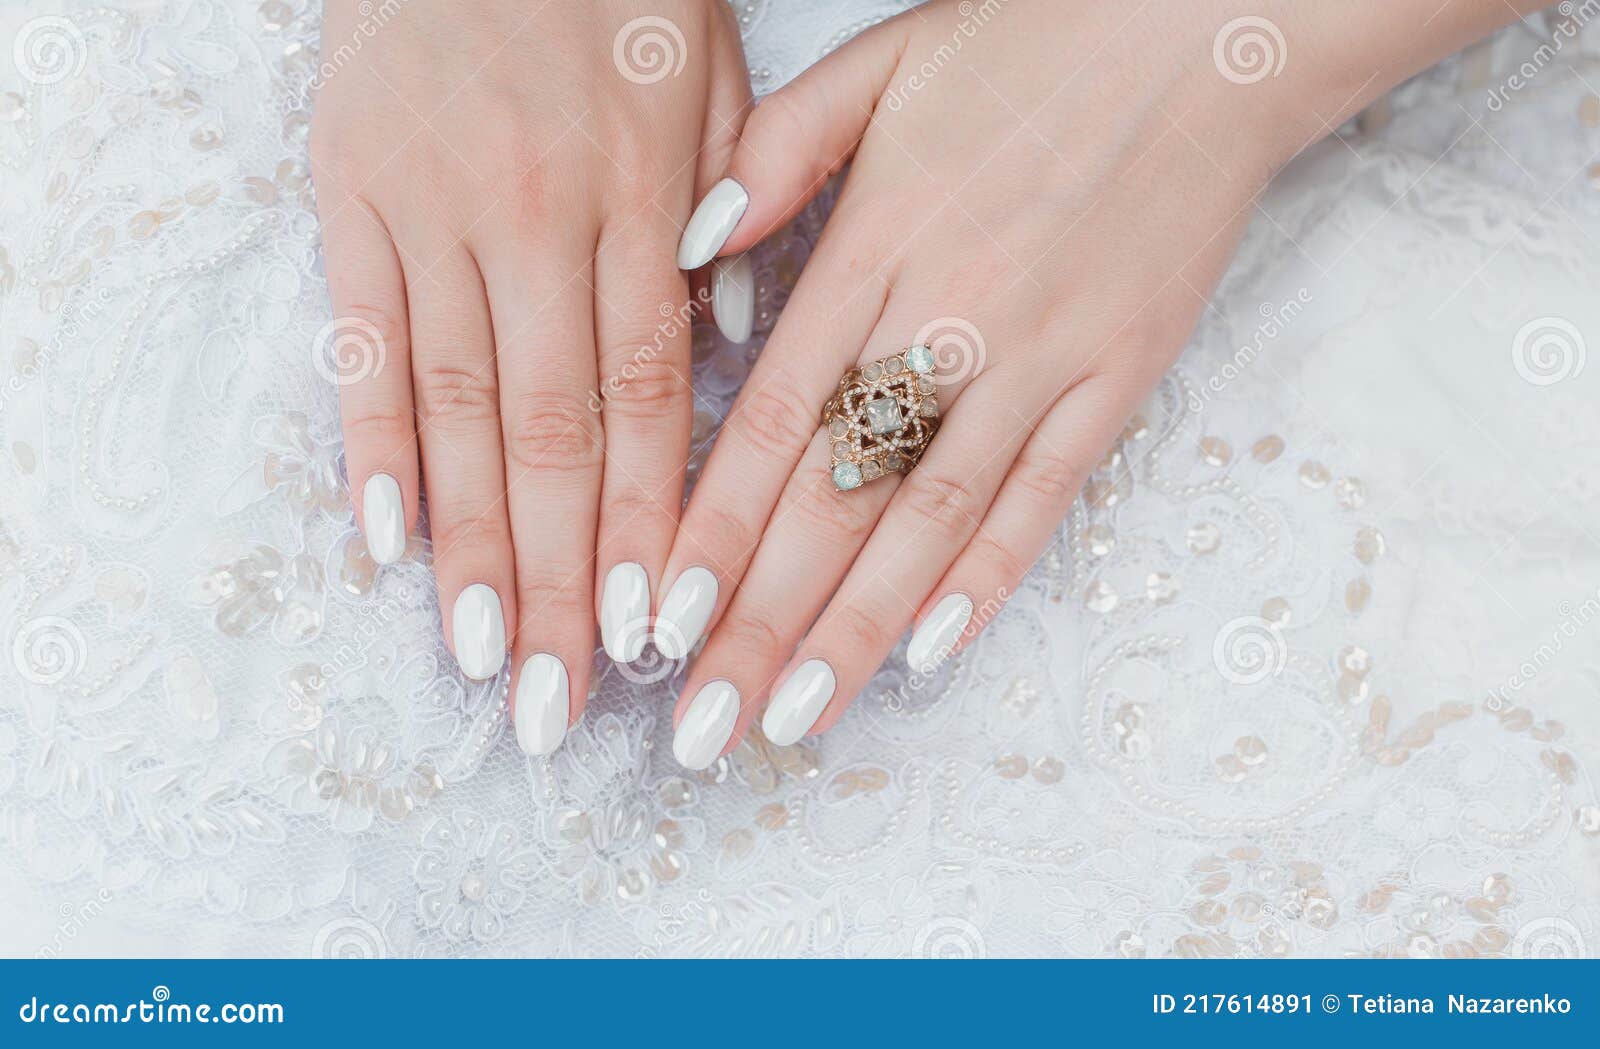 30 Short Bridal Nails for the Perfect Wedding Look - Uptown Girl